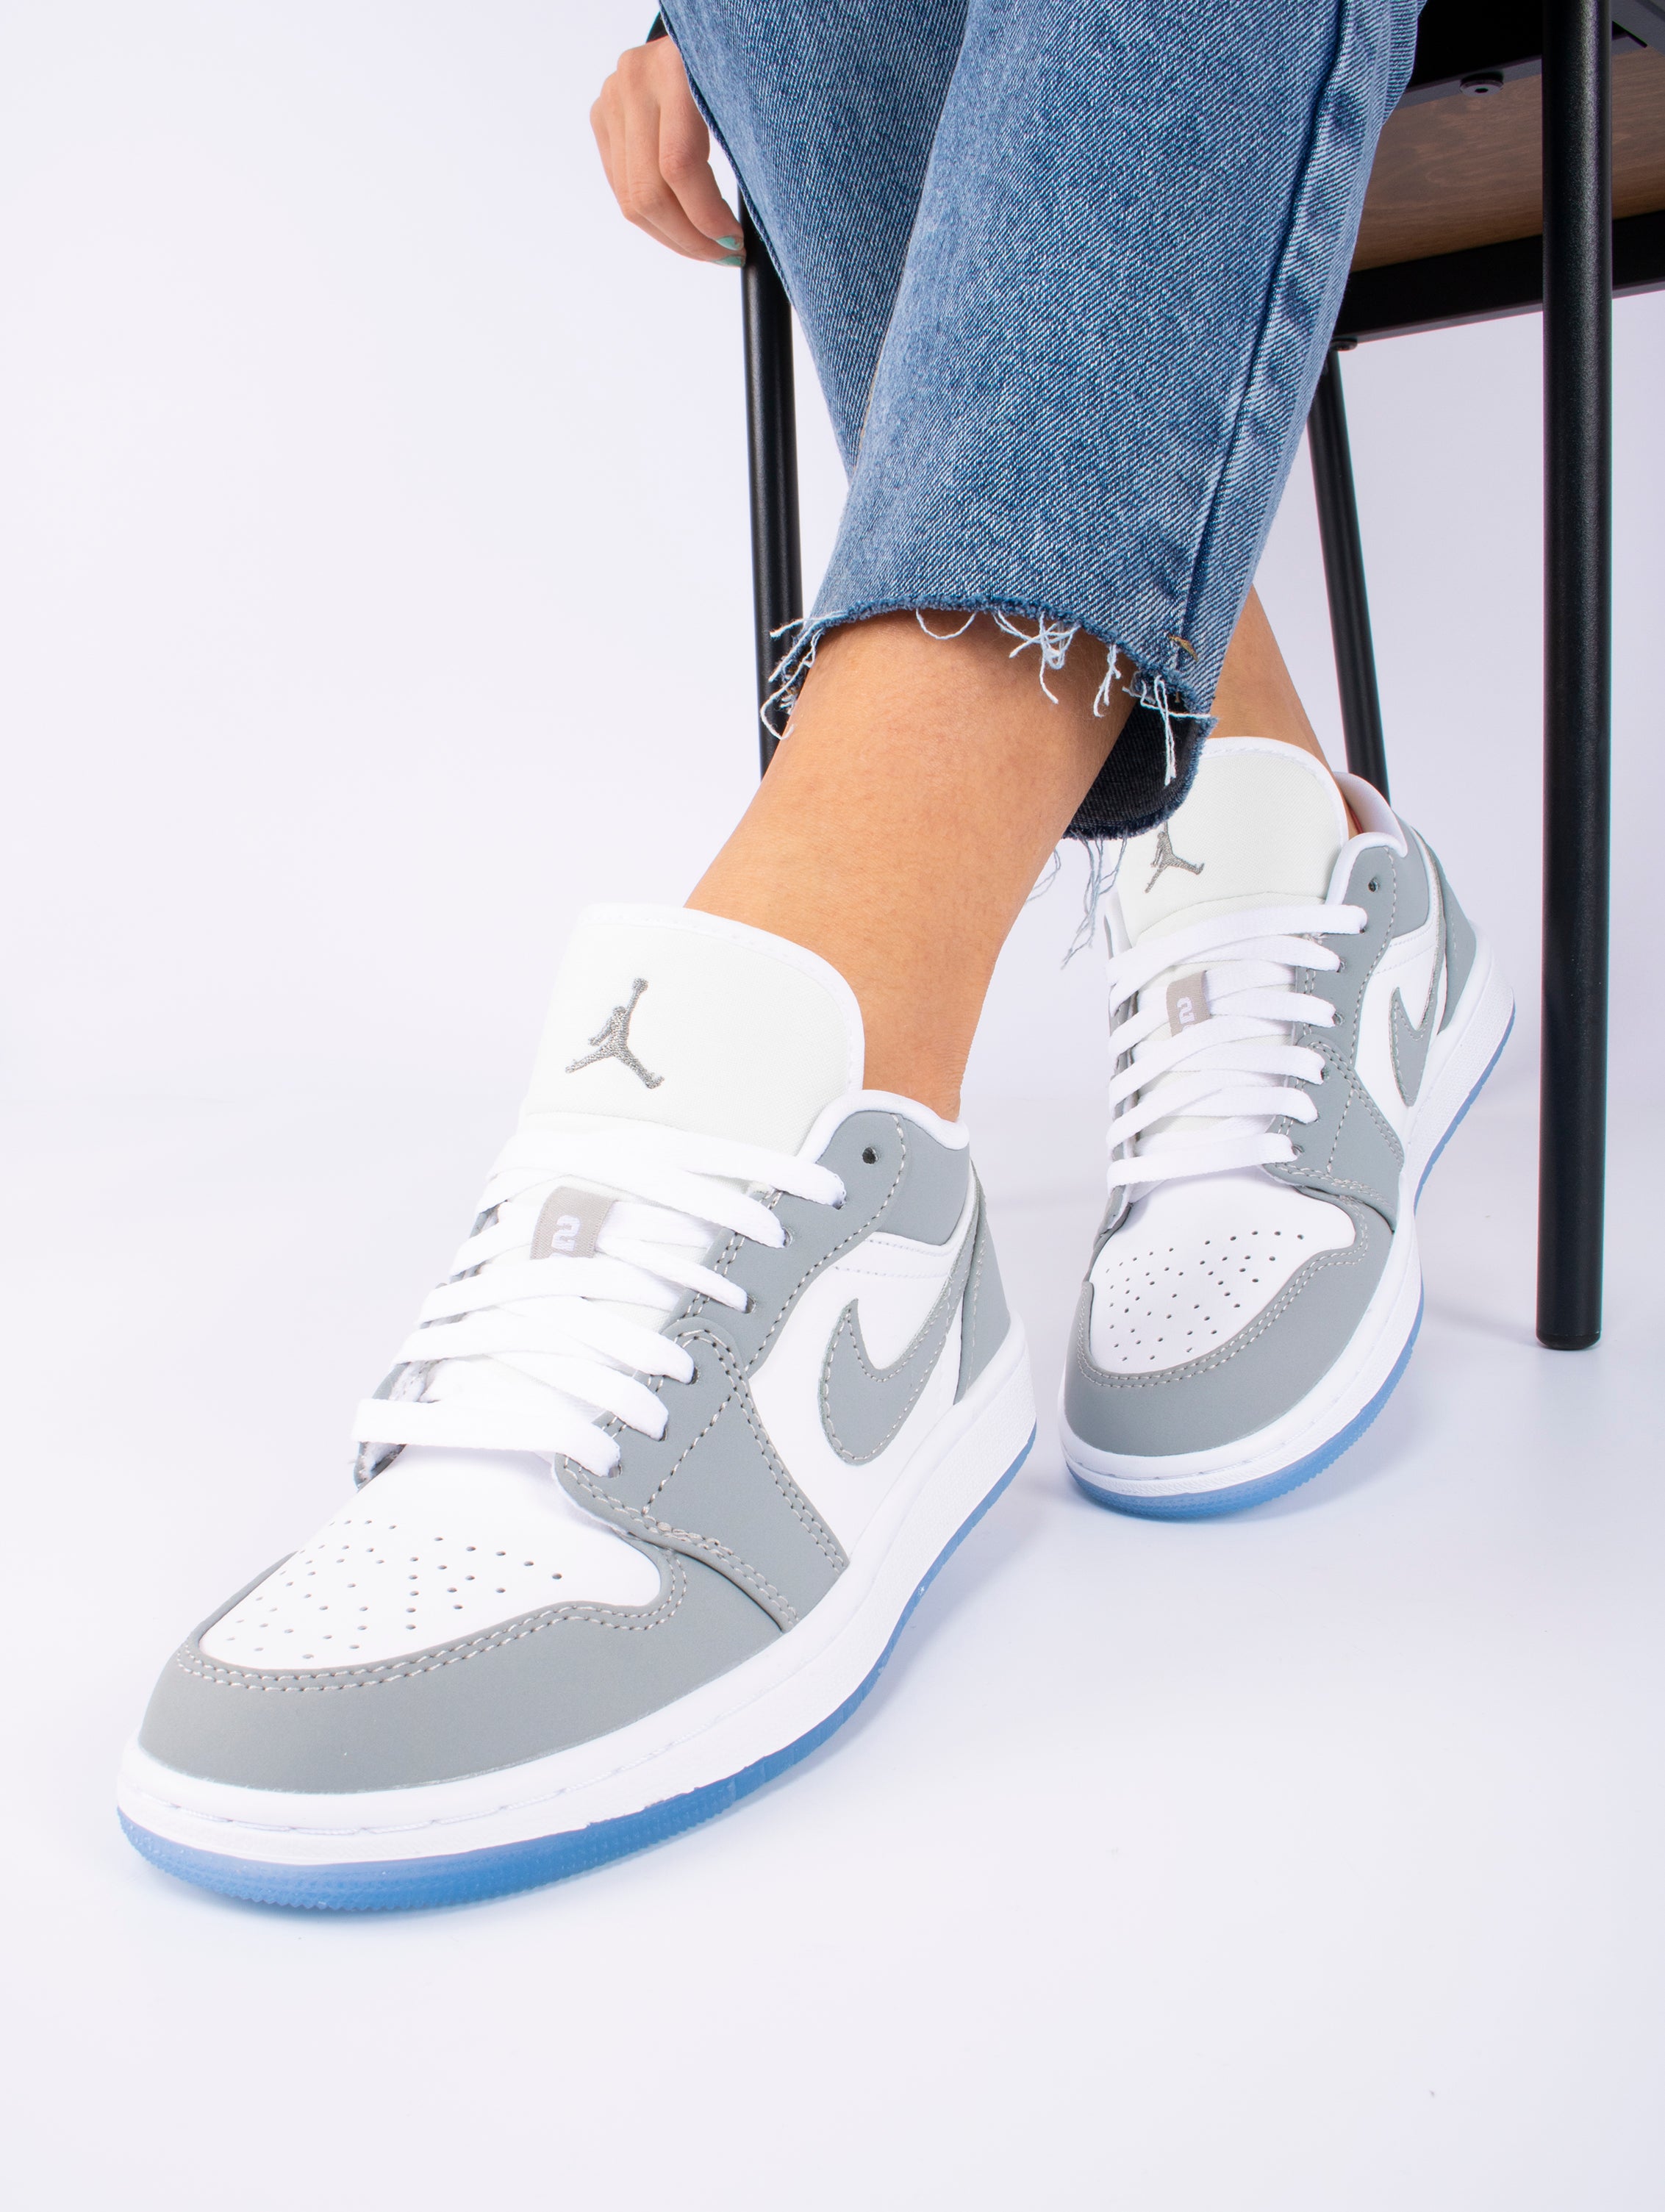 Nike Air Jordan 1 Low Keep It Cool With Grey Uppers And Icy Soles